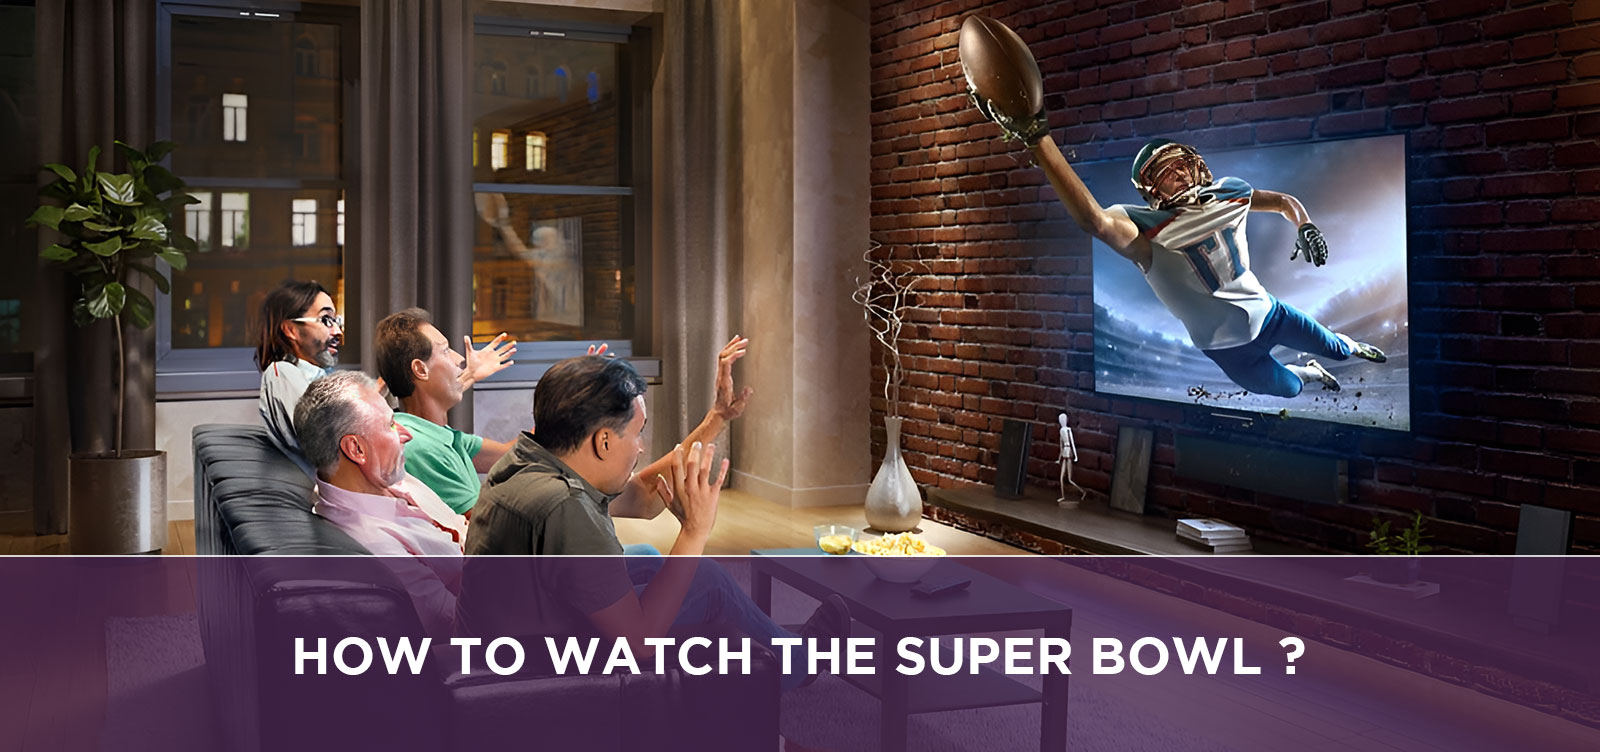 How to Watch the Super Bowl?